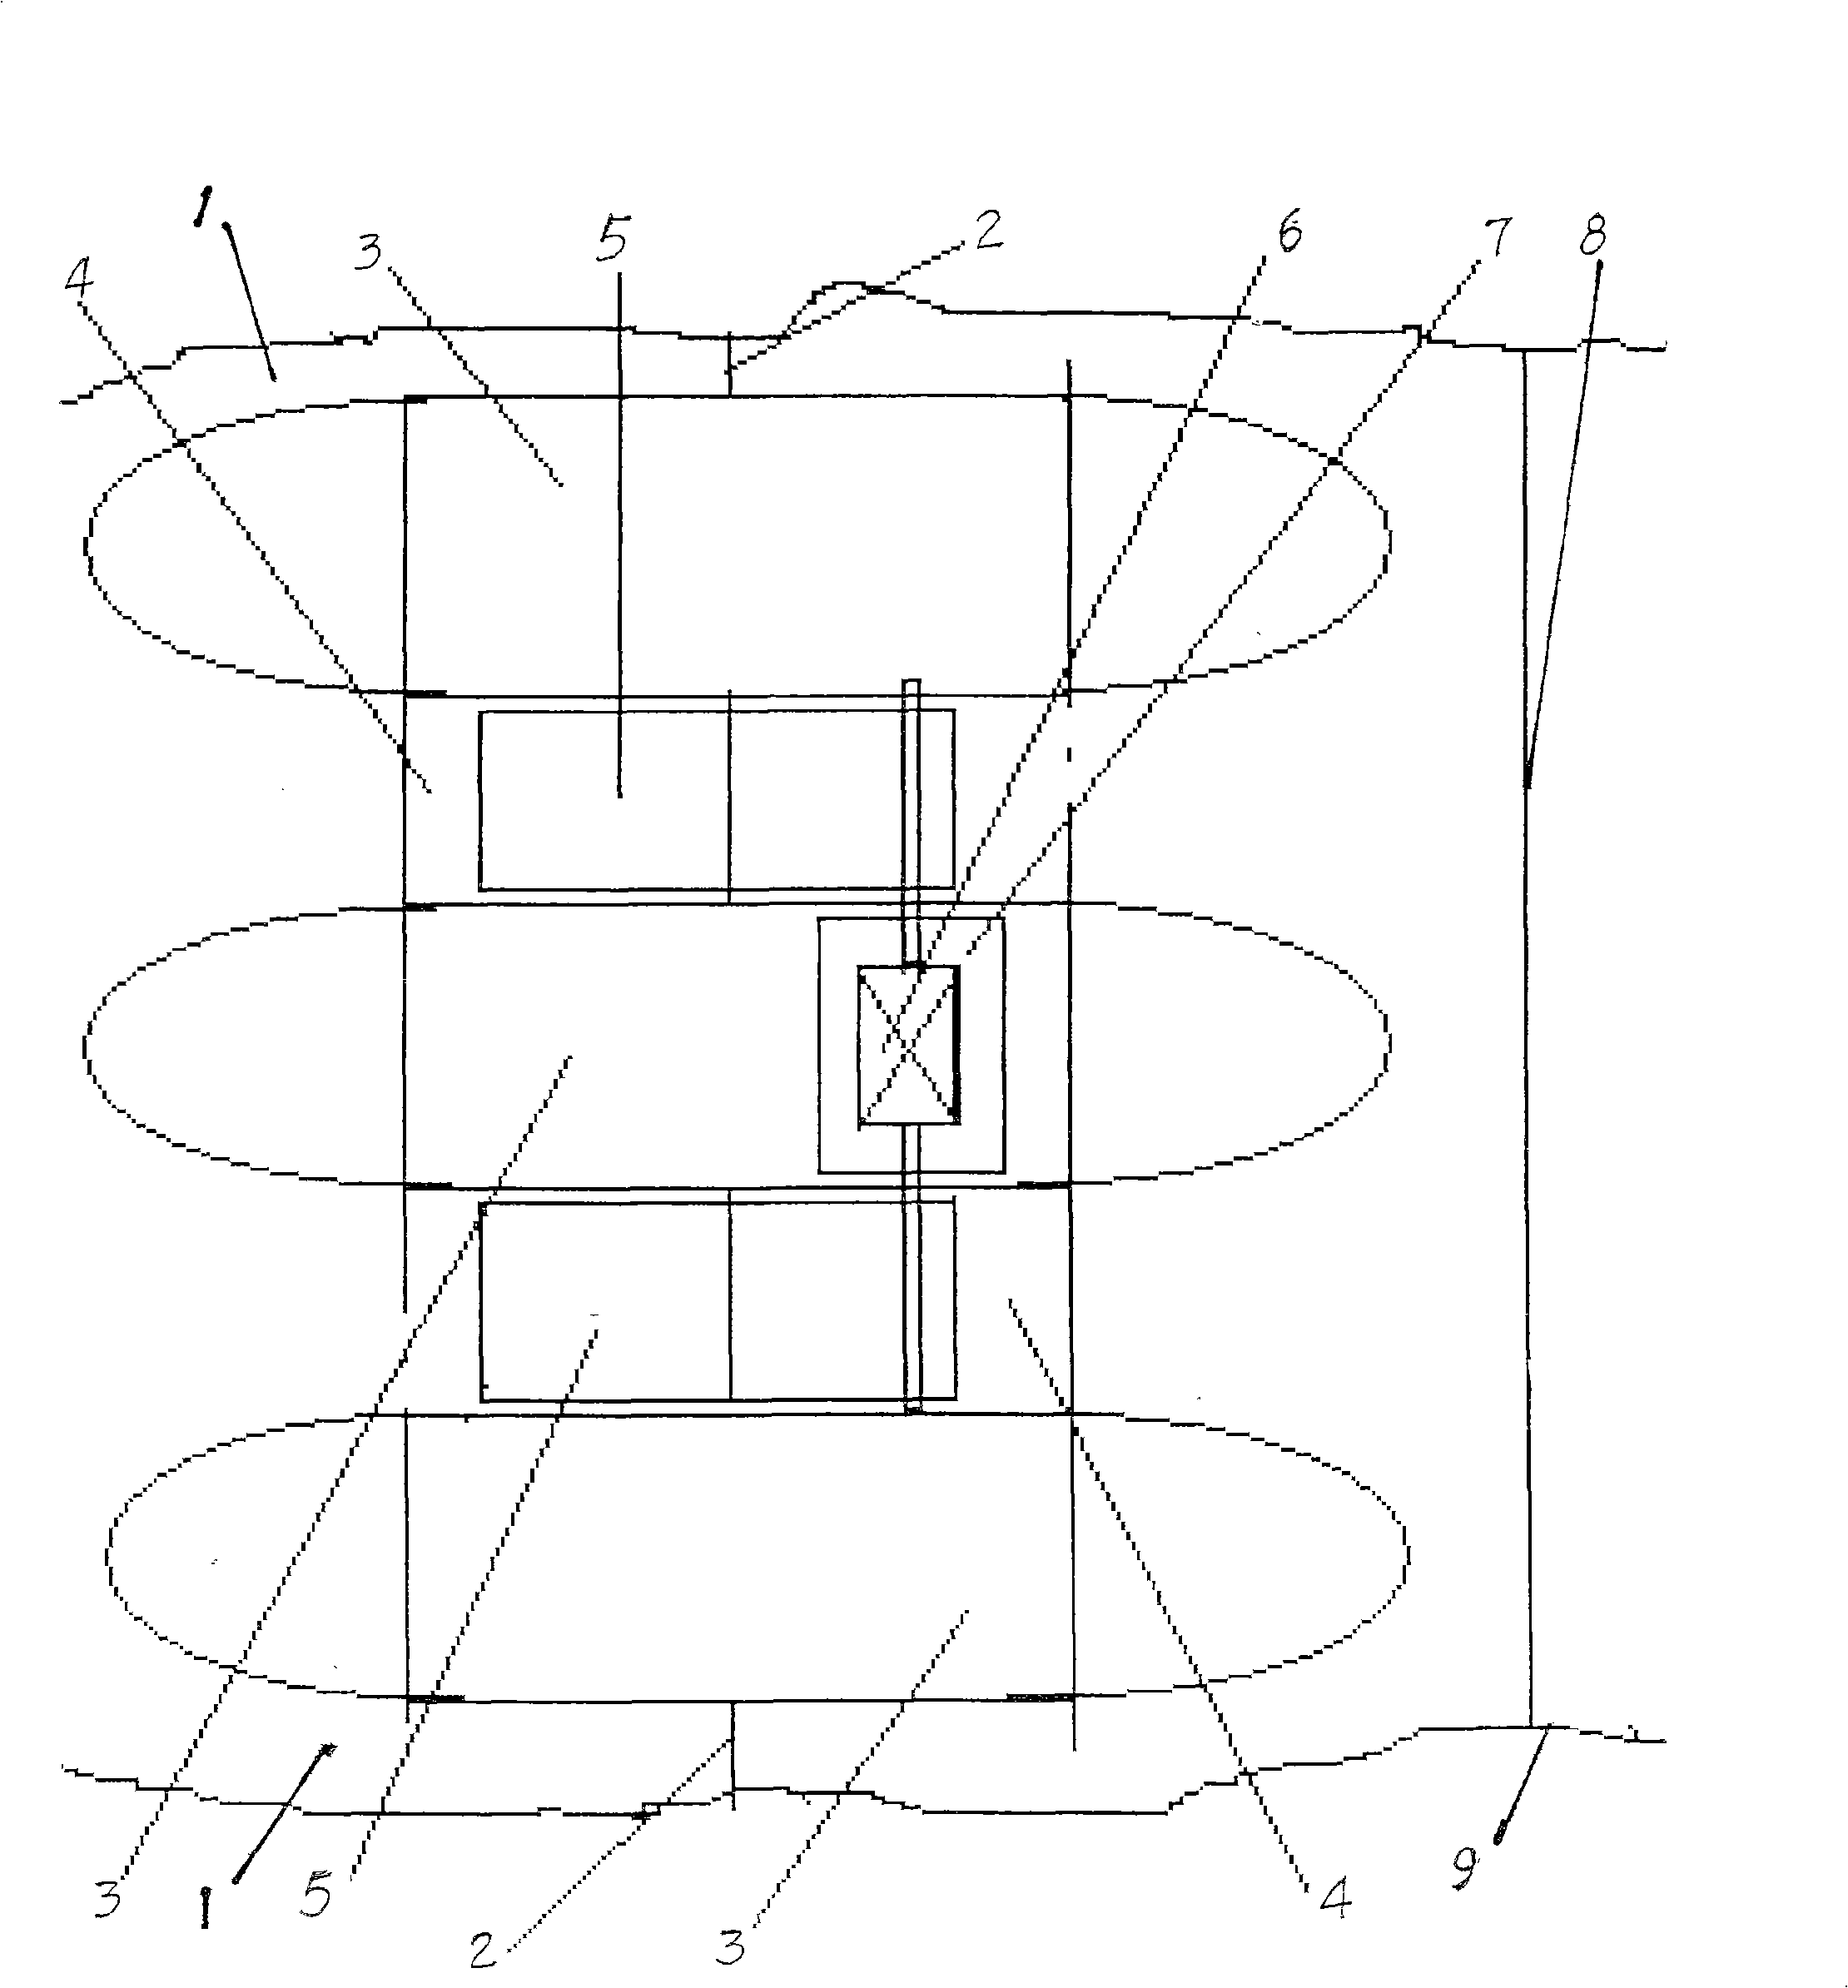 Device and method for generating electricity with sea water in coasts